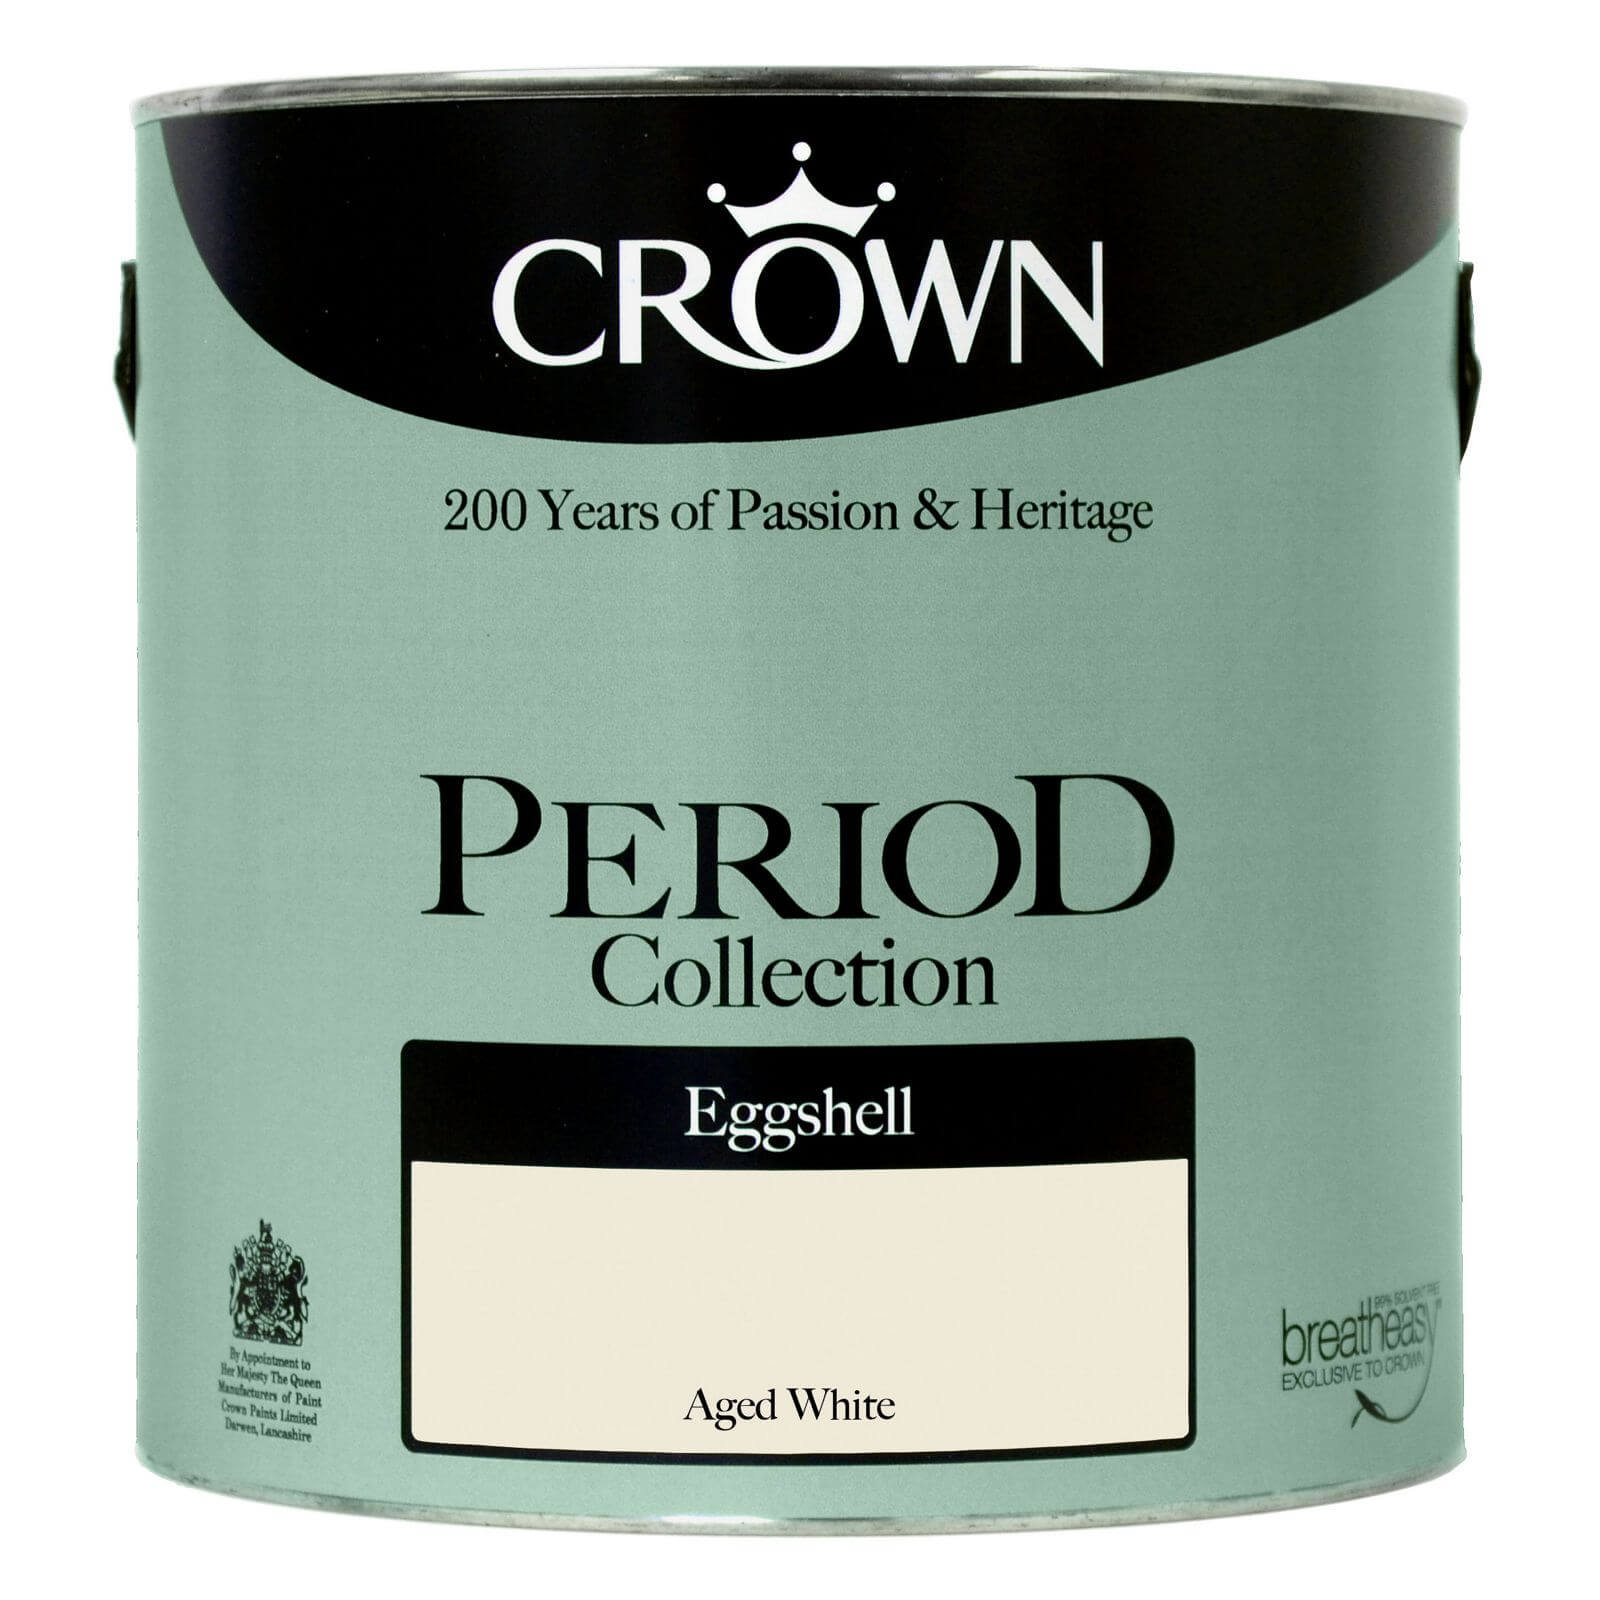 Crown Period Colours Breatheasy Aged White - Eggshell Paint - 2.5L